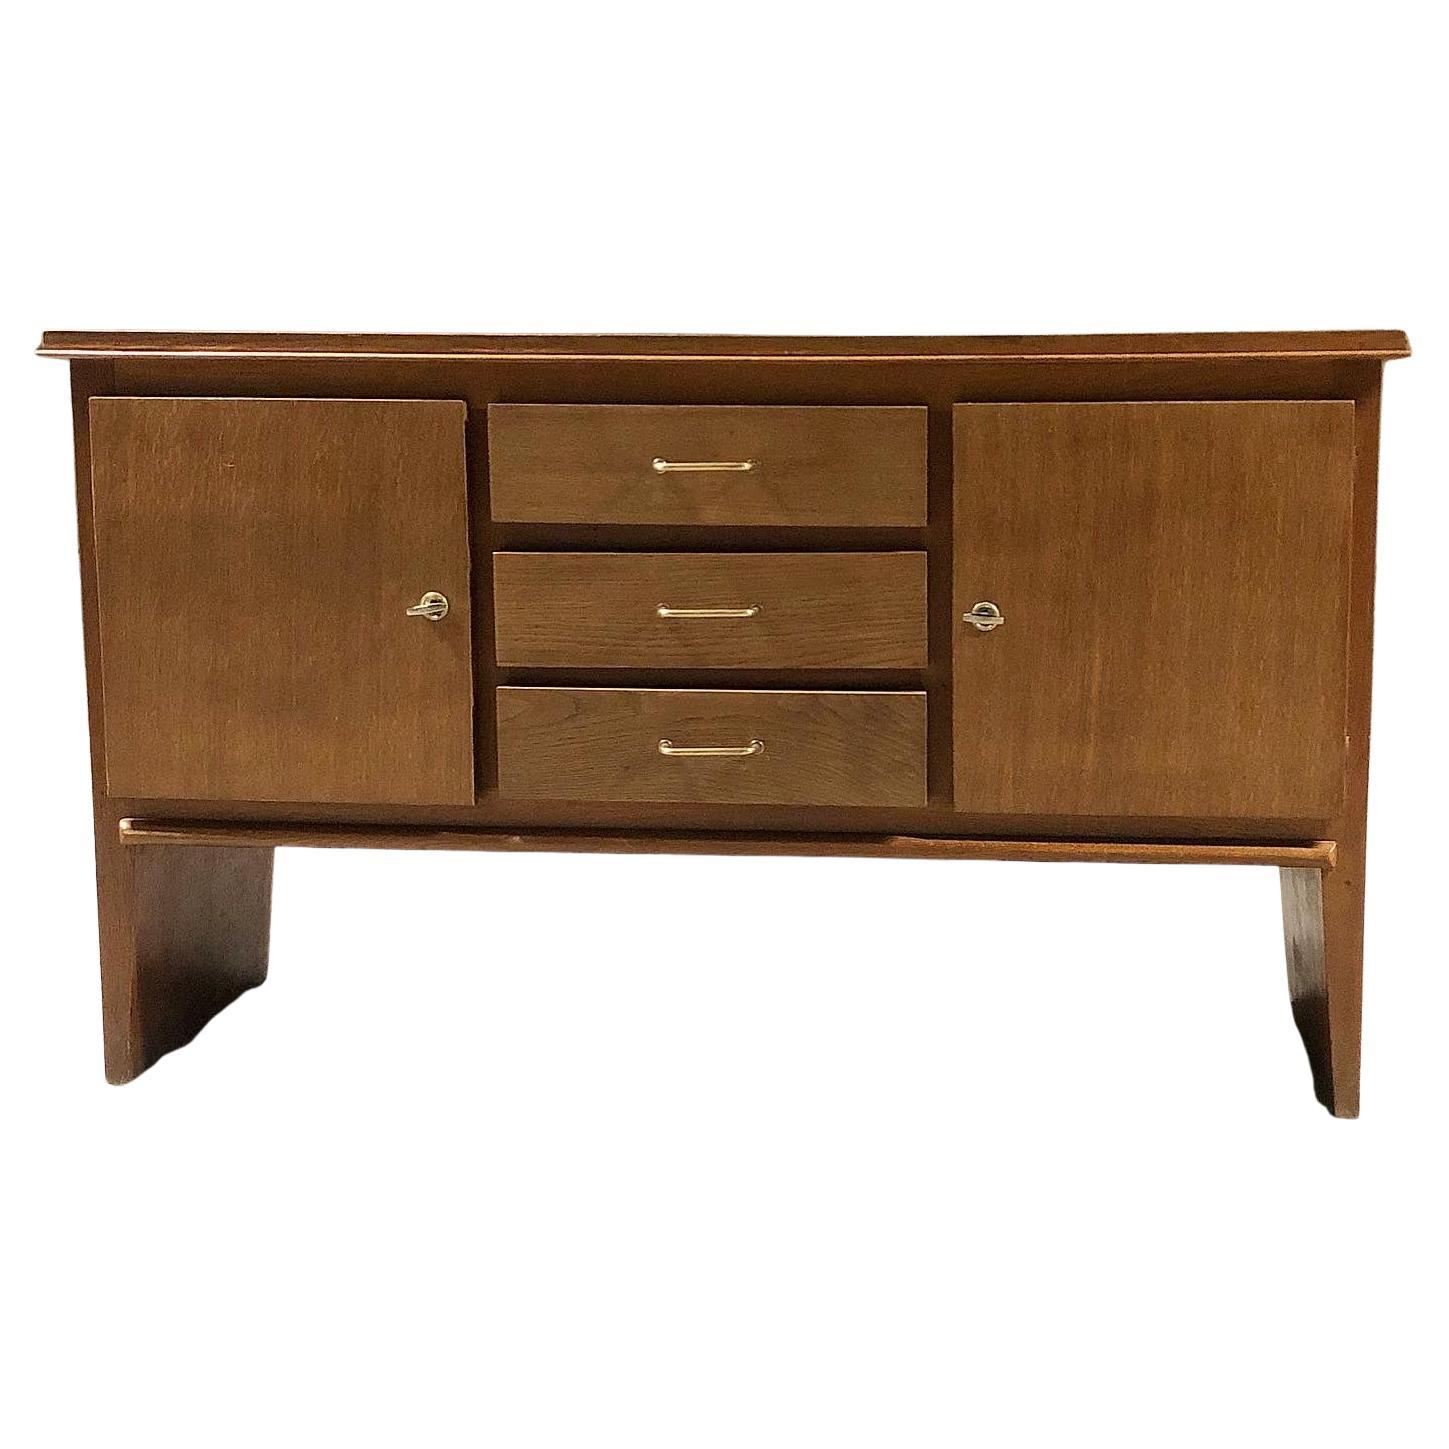 Oak Buffet with 2 Doors and 3 Drawers by René Gabriel, 1940s For Sale